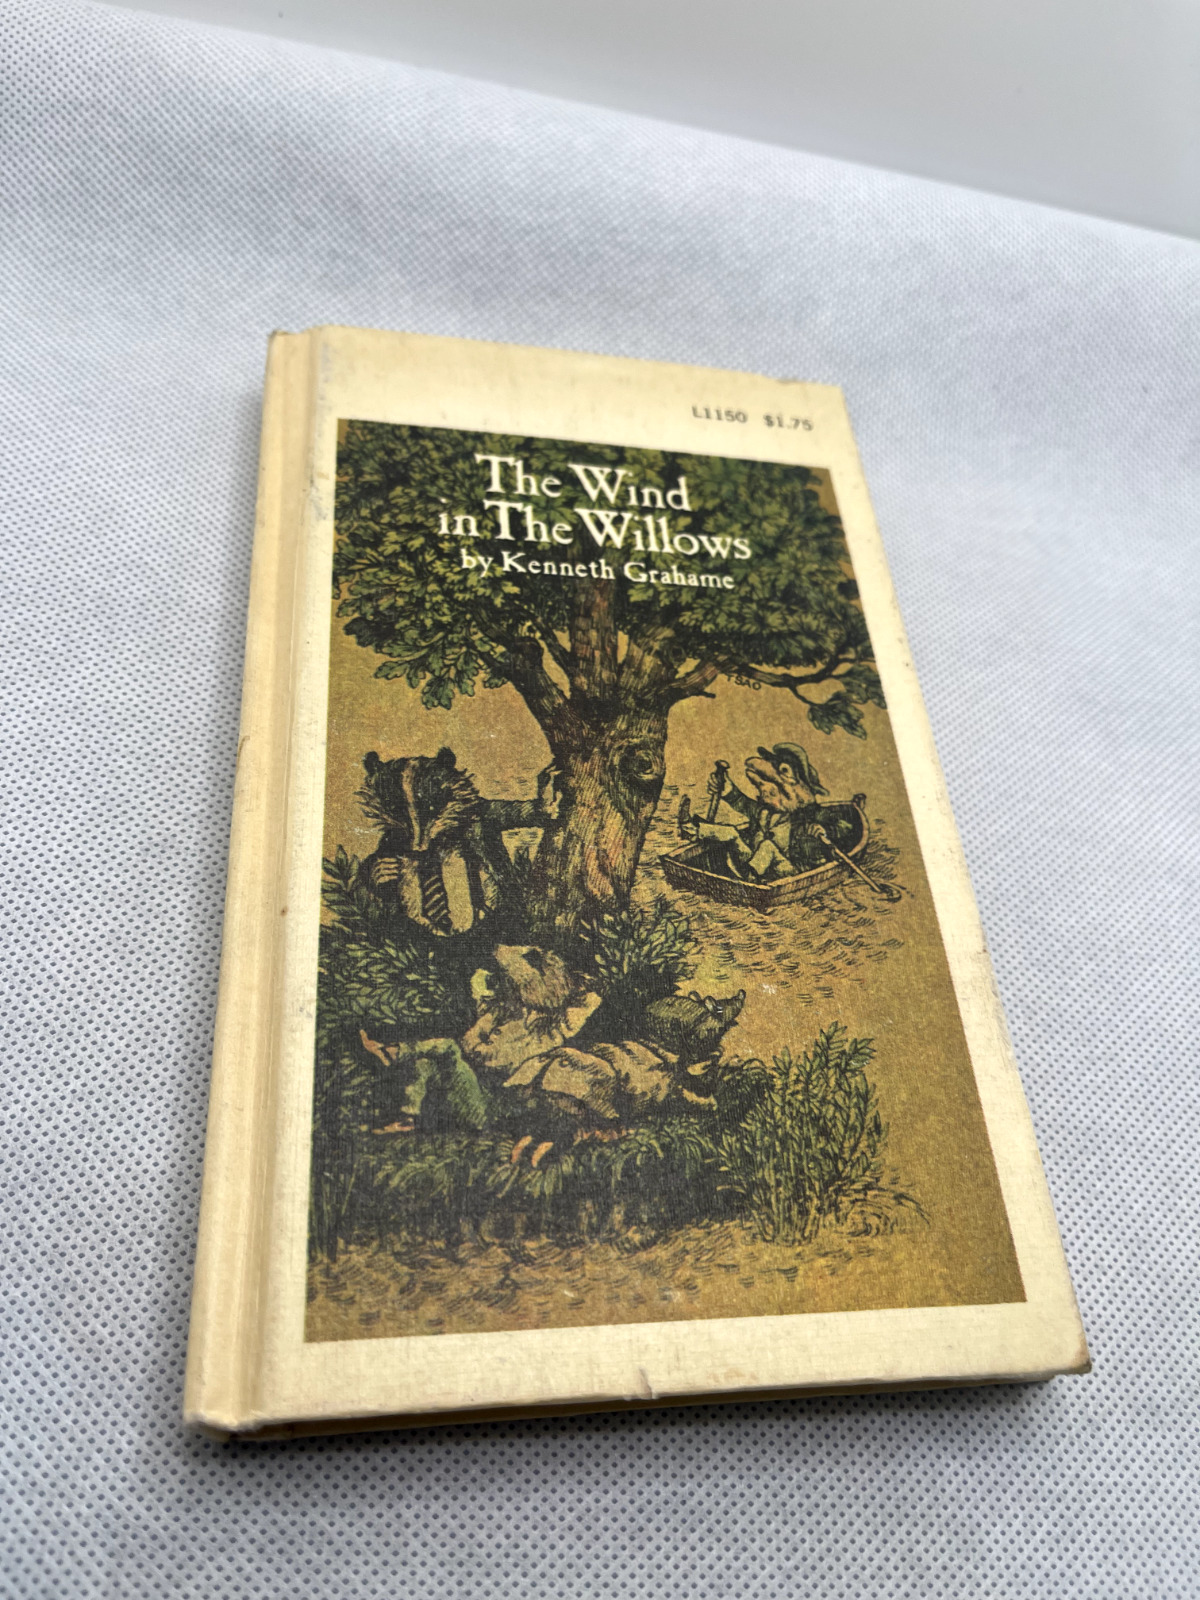 The wind in the willows, by Kenneth Grahame vintage HARDCOVER